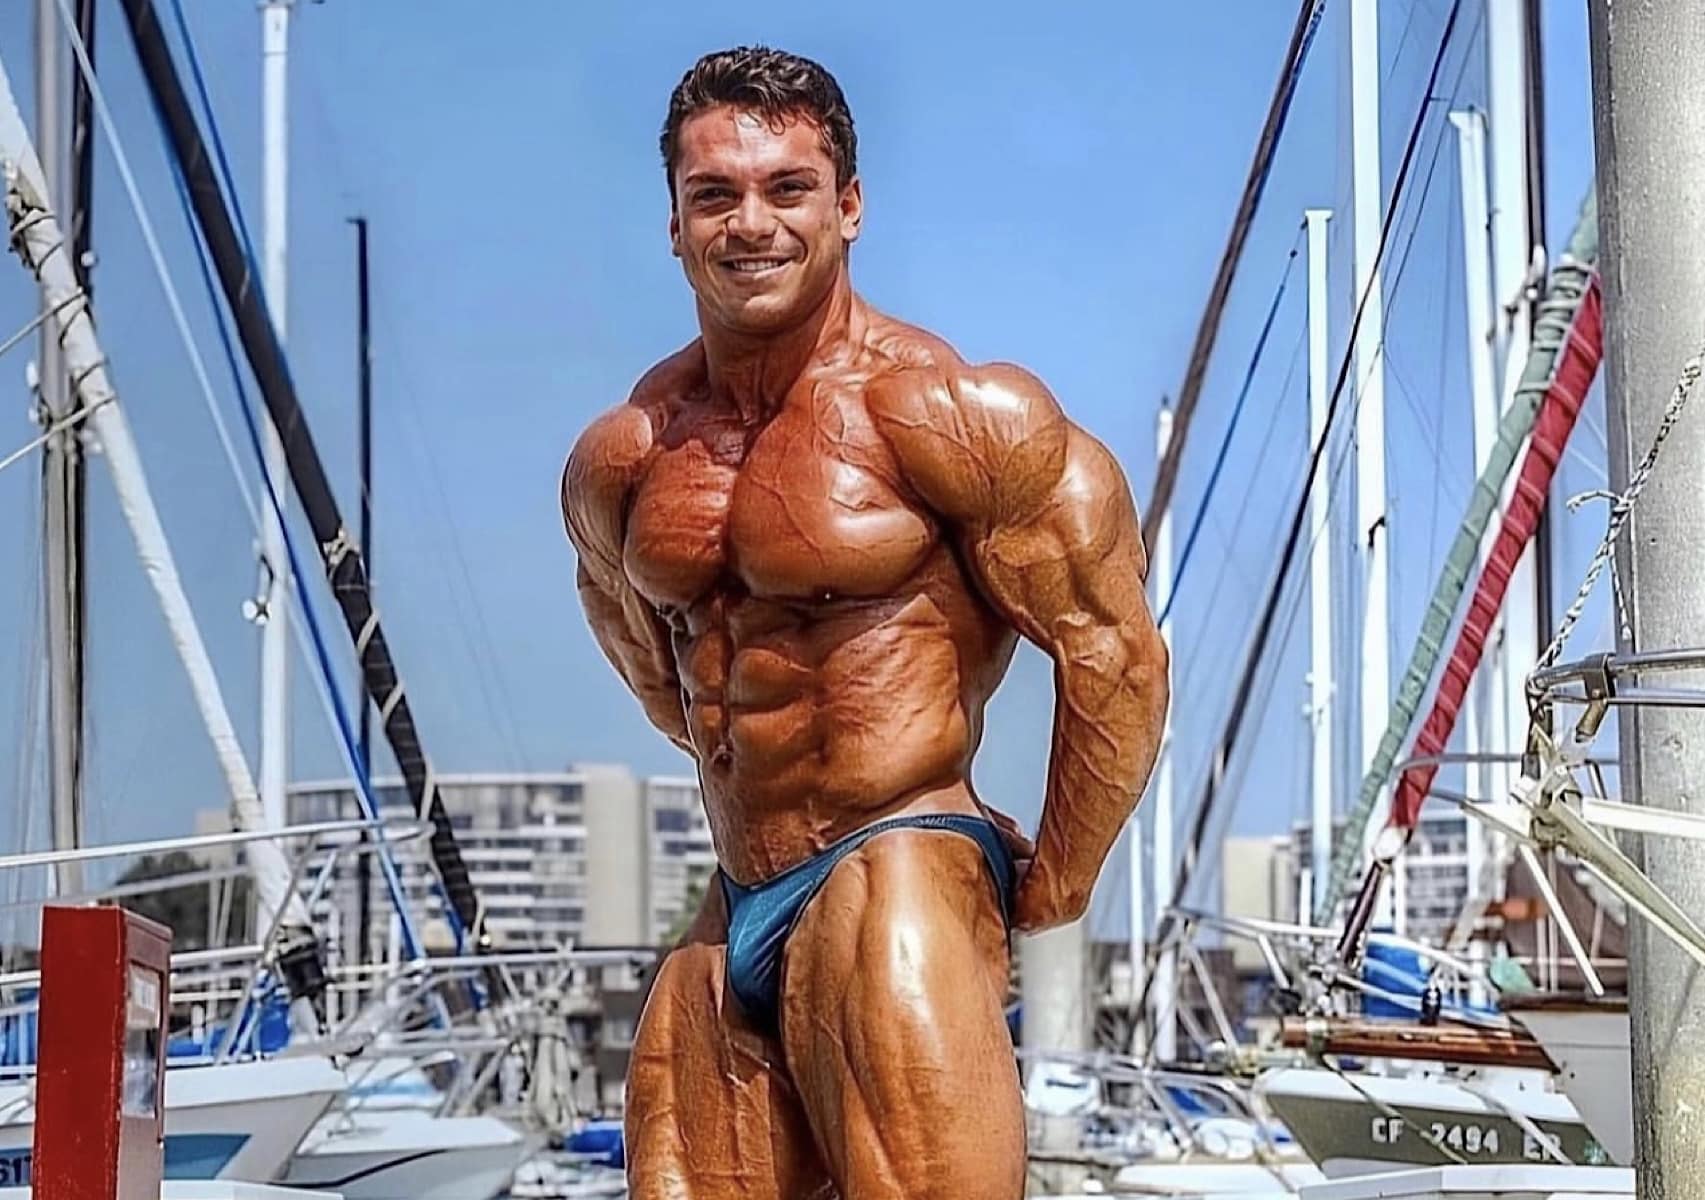 Rich Gaspari is one of the most successful bodybuilders of all time 